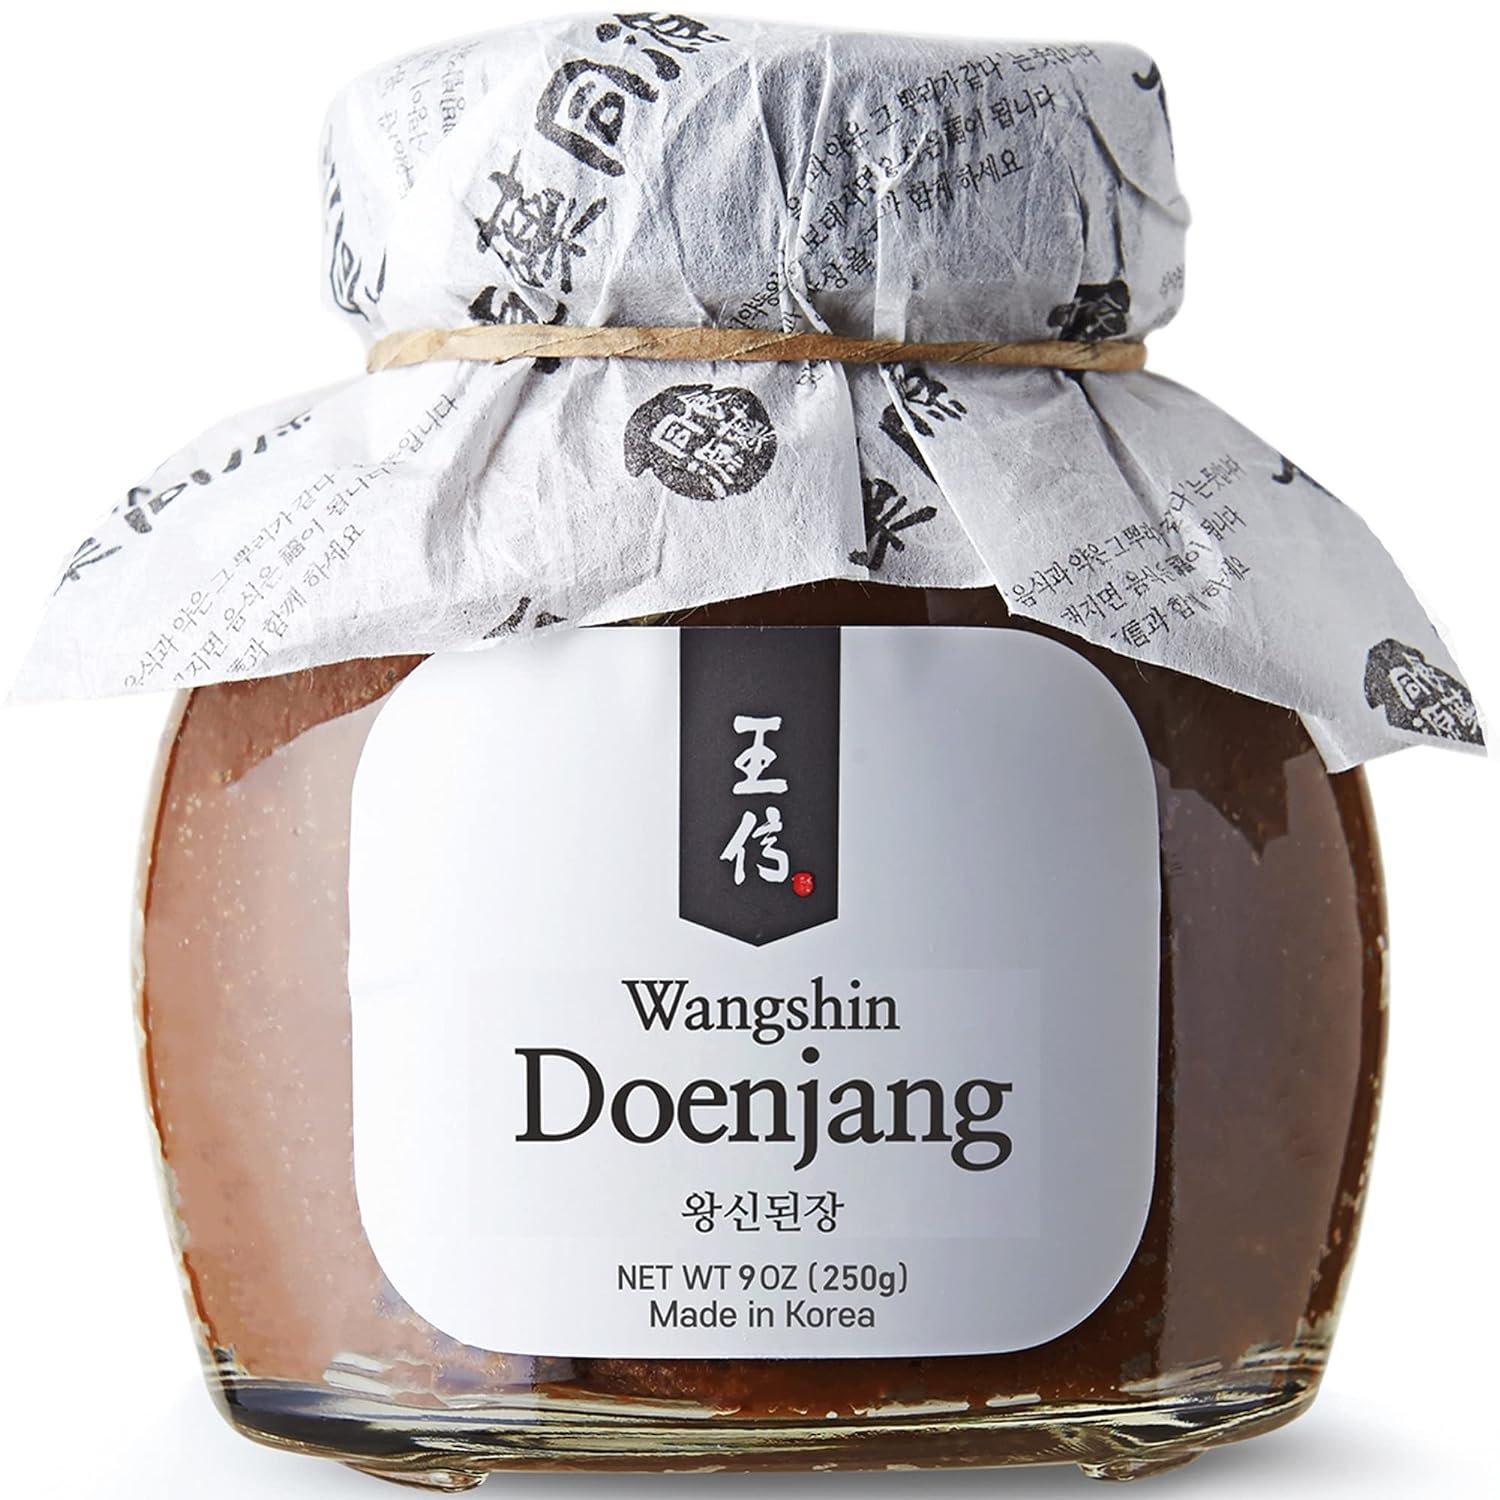 Wangshin Doenjang Aged 3 Years (9oz) - Korean Traditional Premium Soybean Paste. Anchovies and Soy Beans Fermented in Korean Traditional Clay Pots.